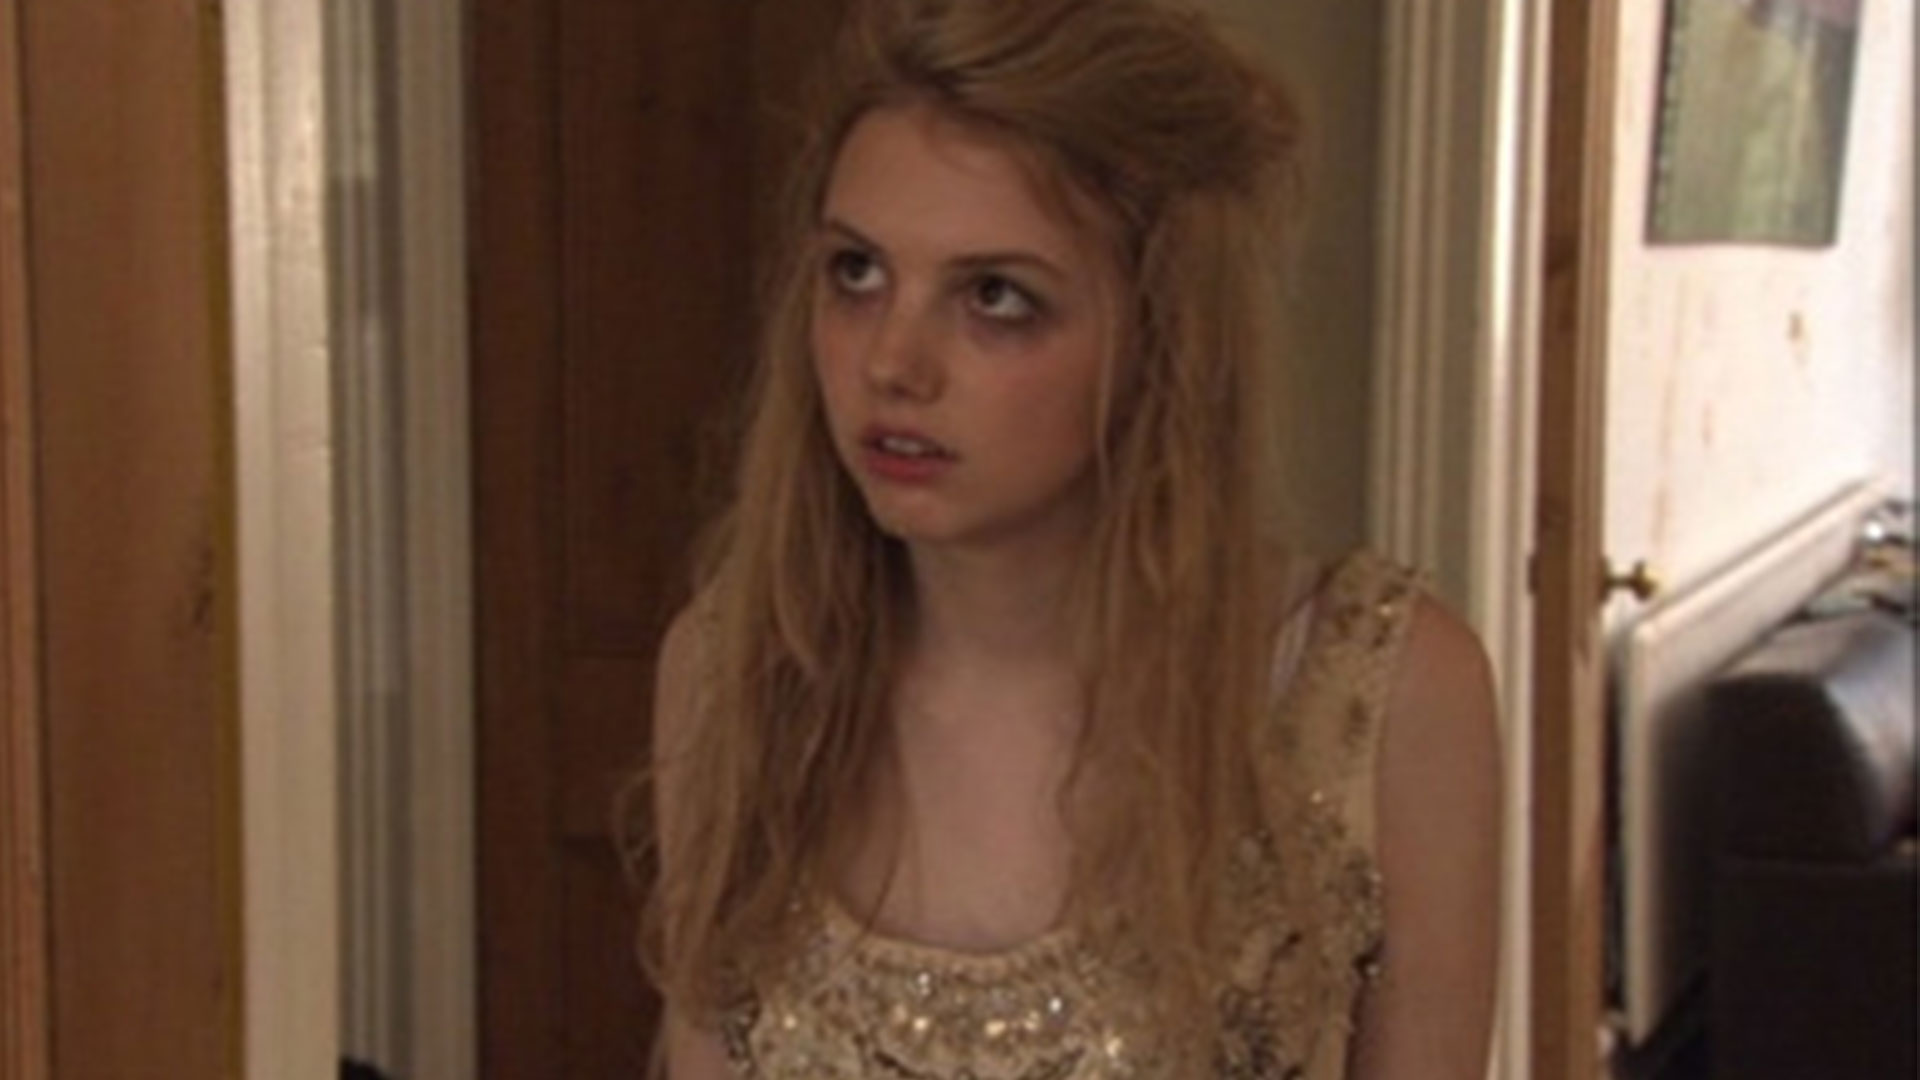 After shedding her blonde hair, Hannah Murray, Game of Thrones and Skins actress was completely unrecognizable